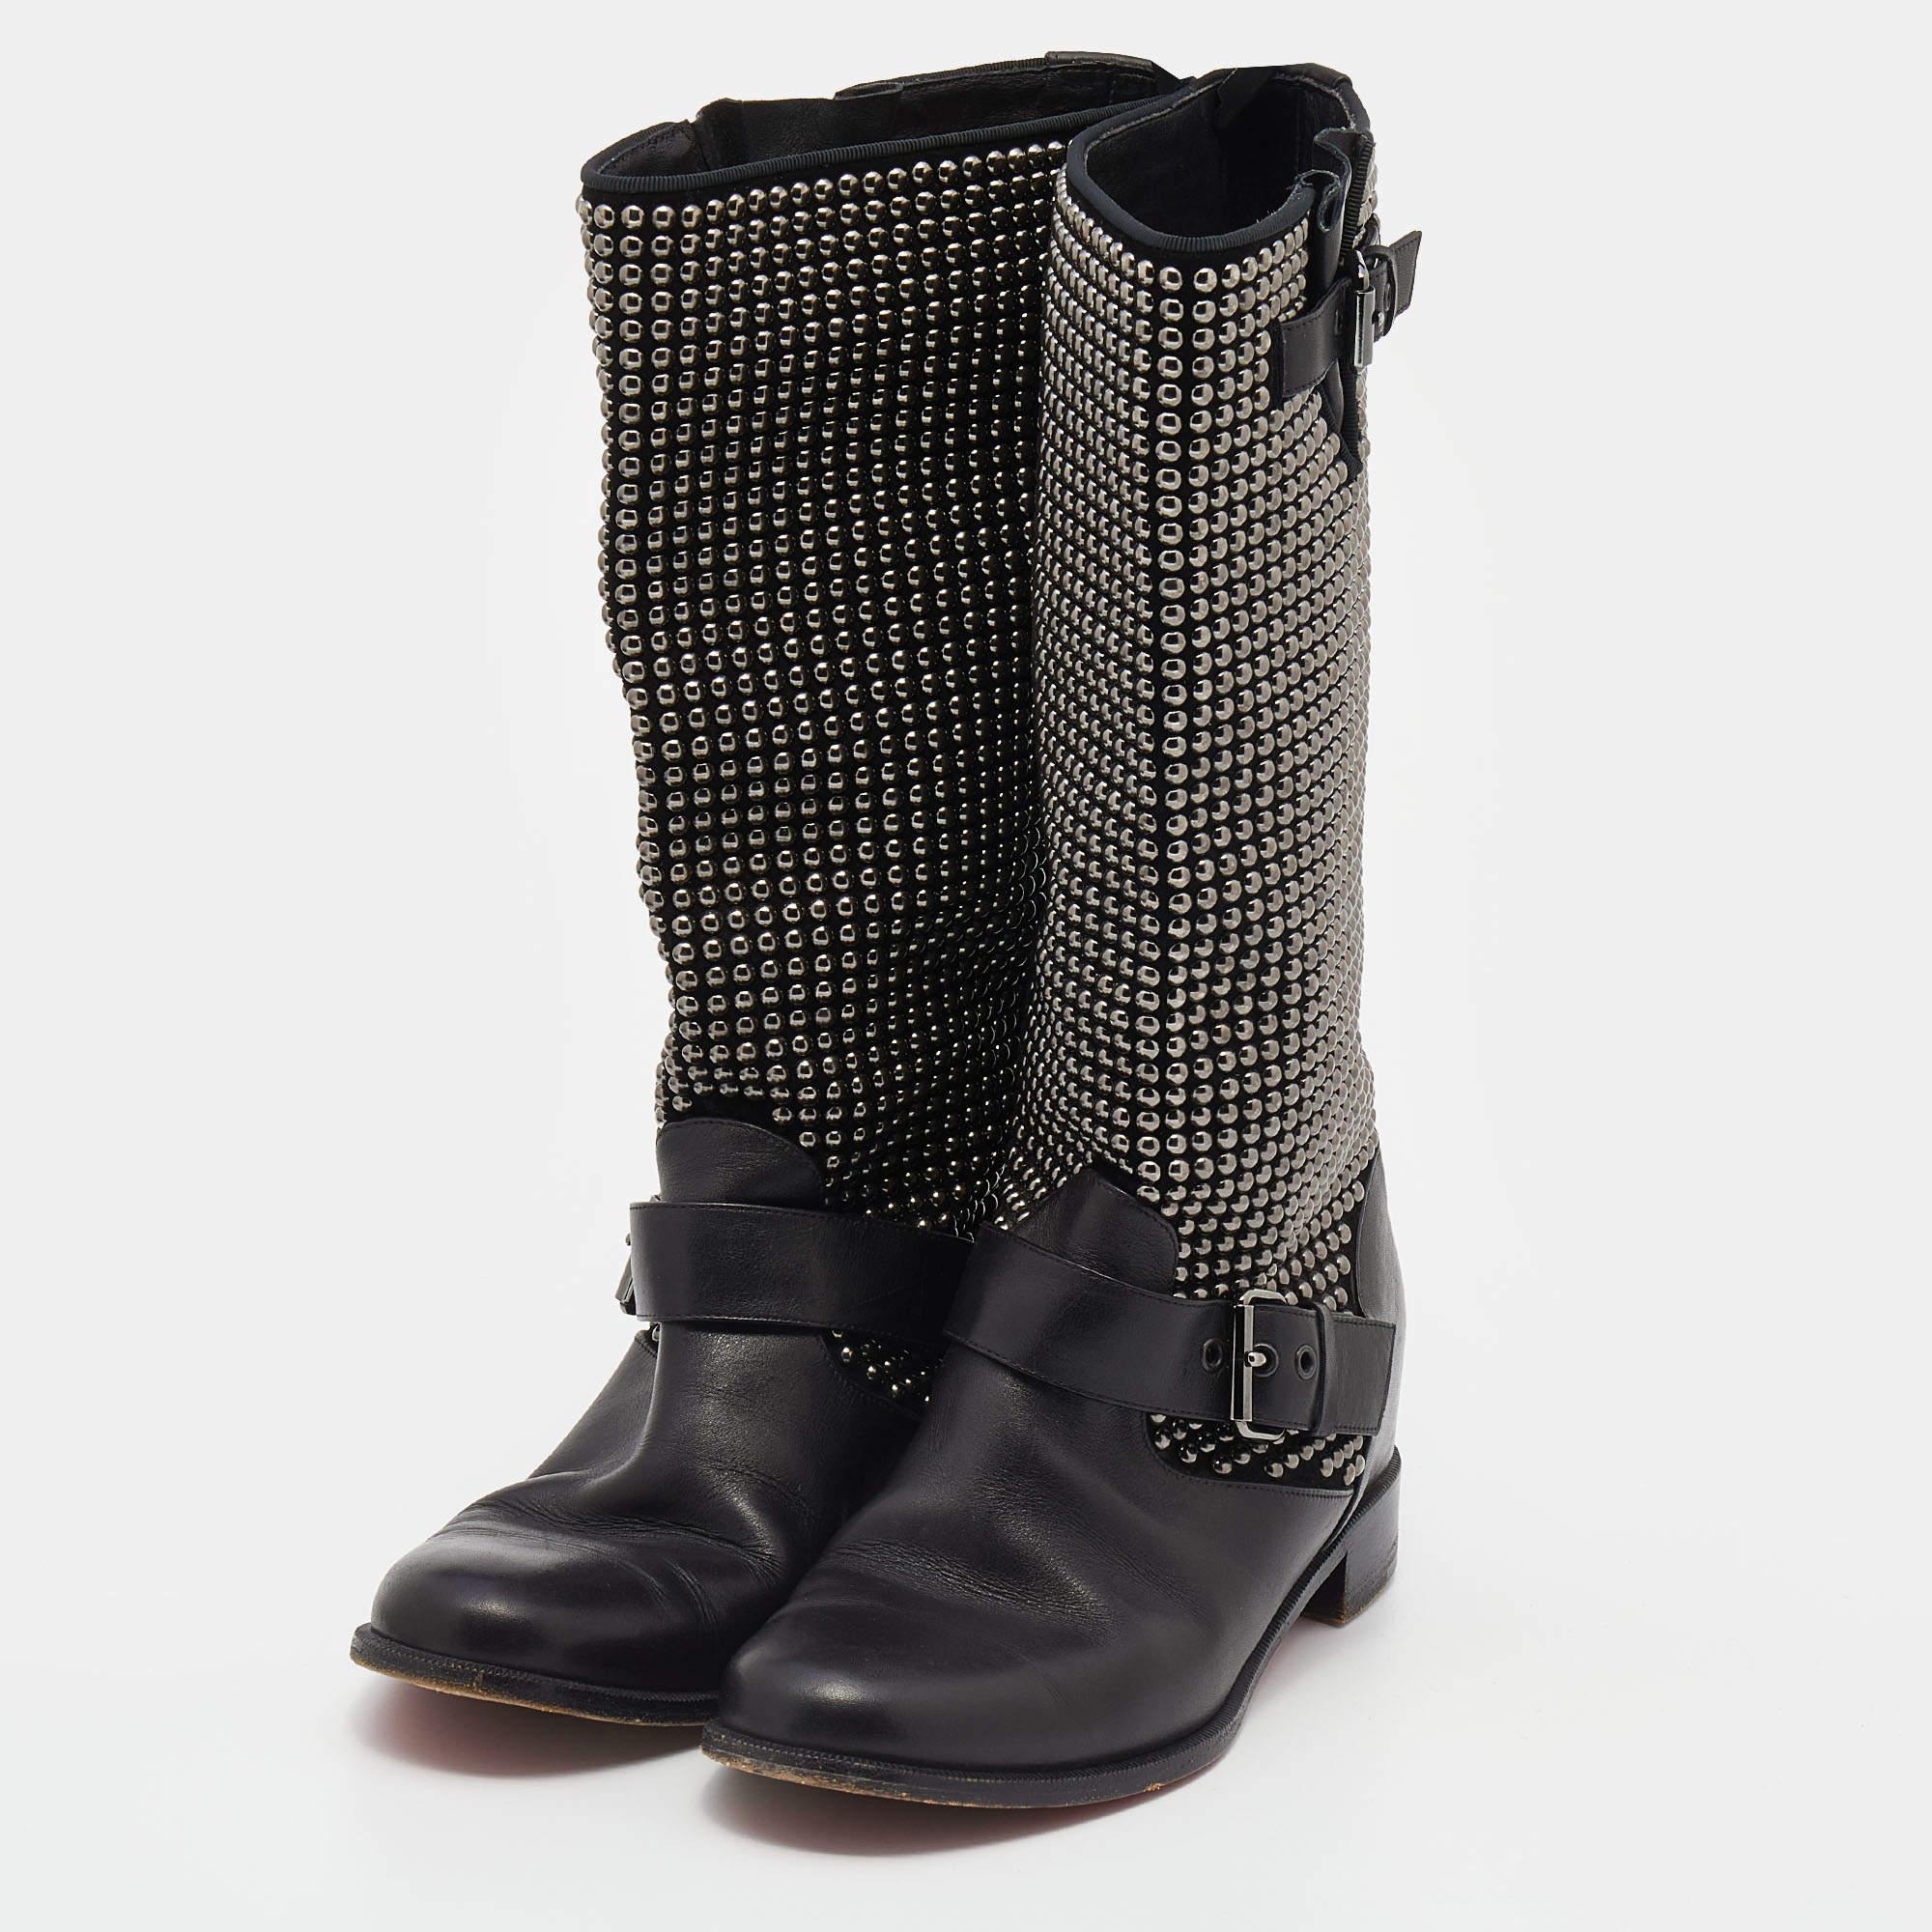 Women's Christian Louboutin Black Leather Studded Buckle Detail Mid Calf Boots Size 38